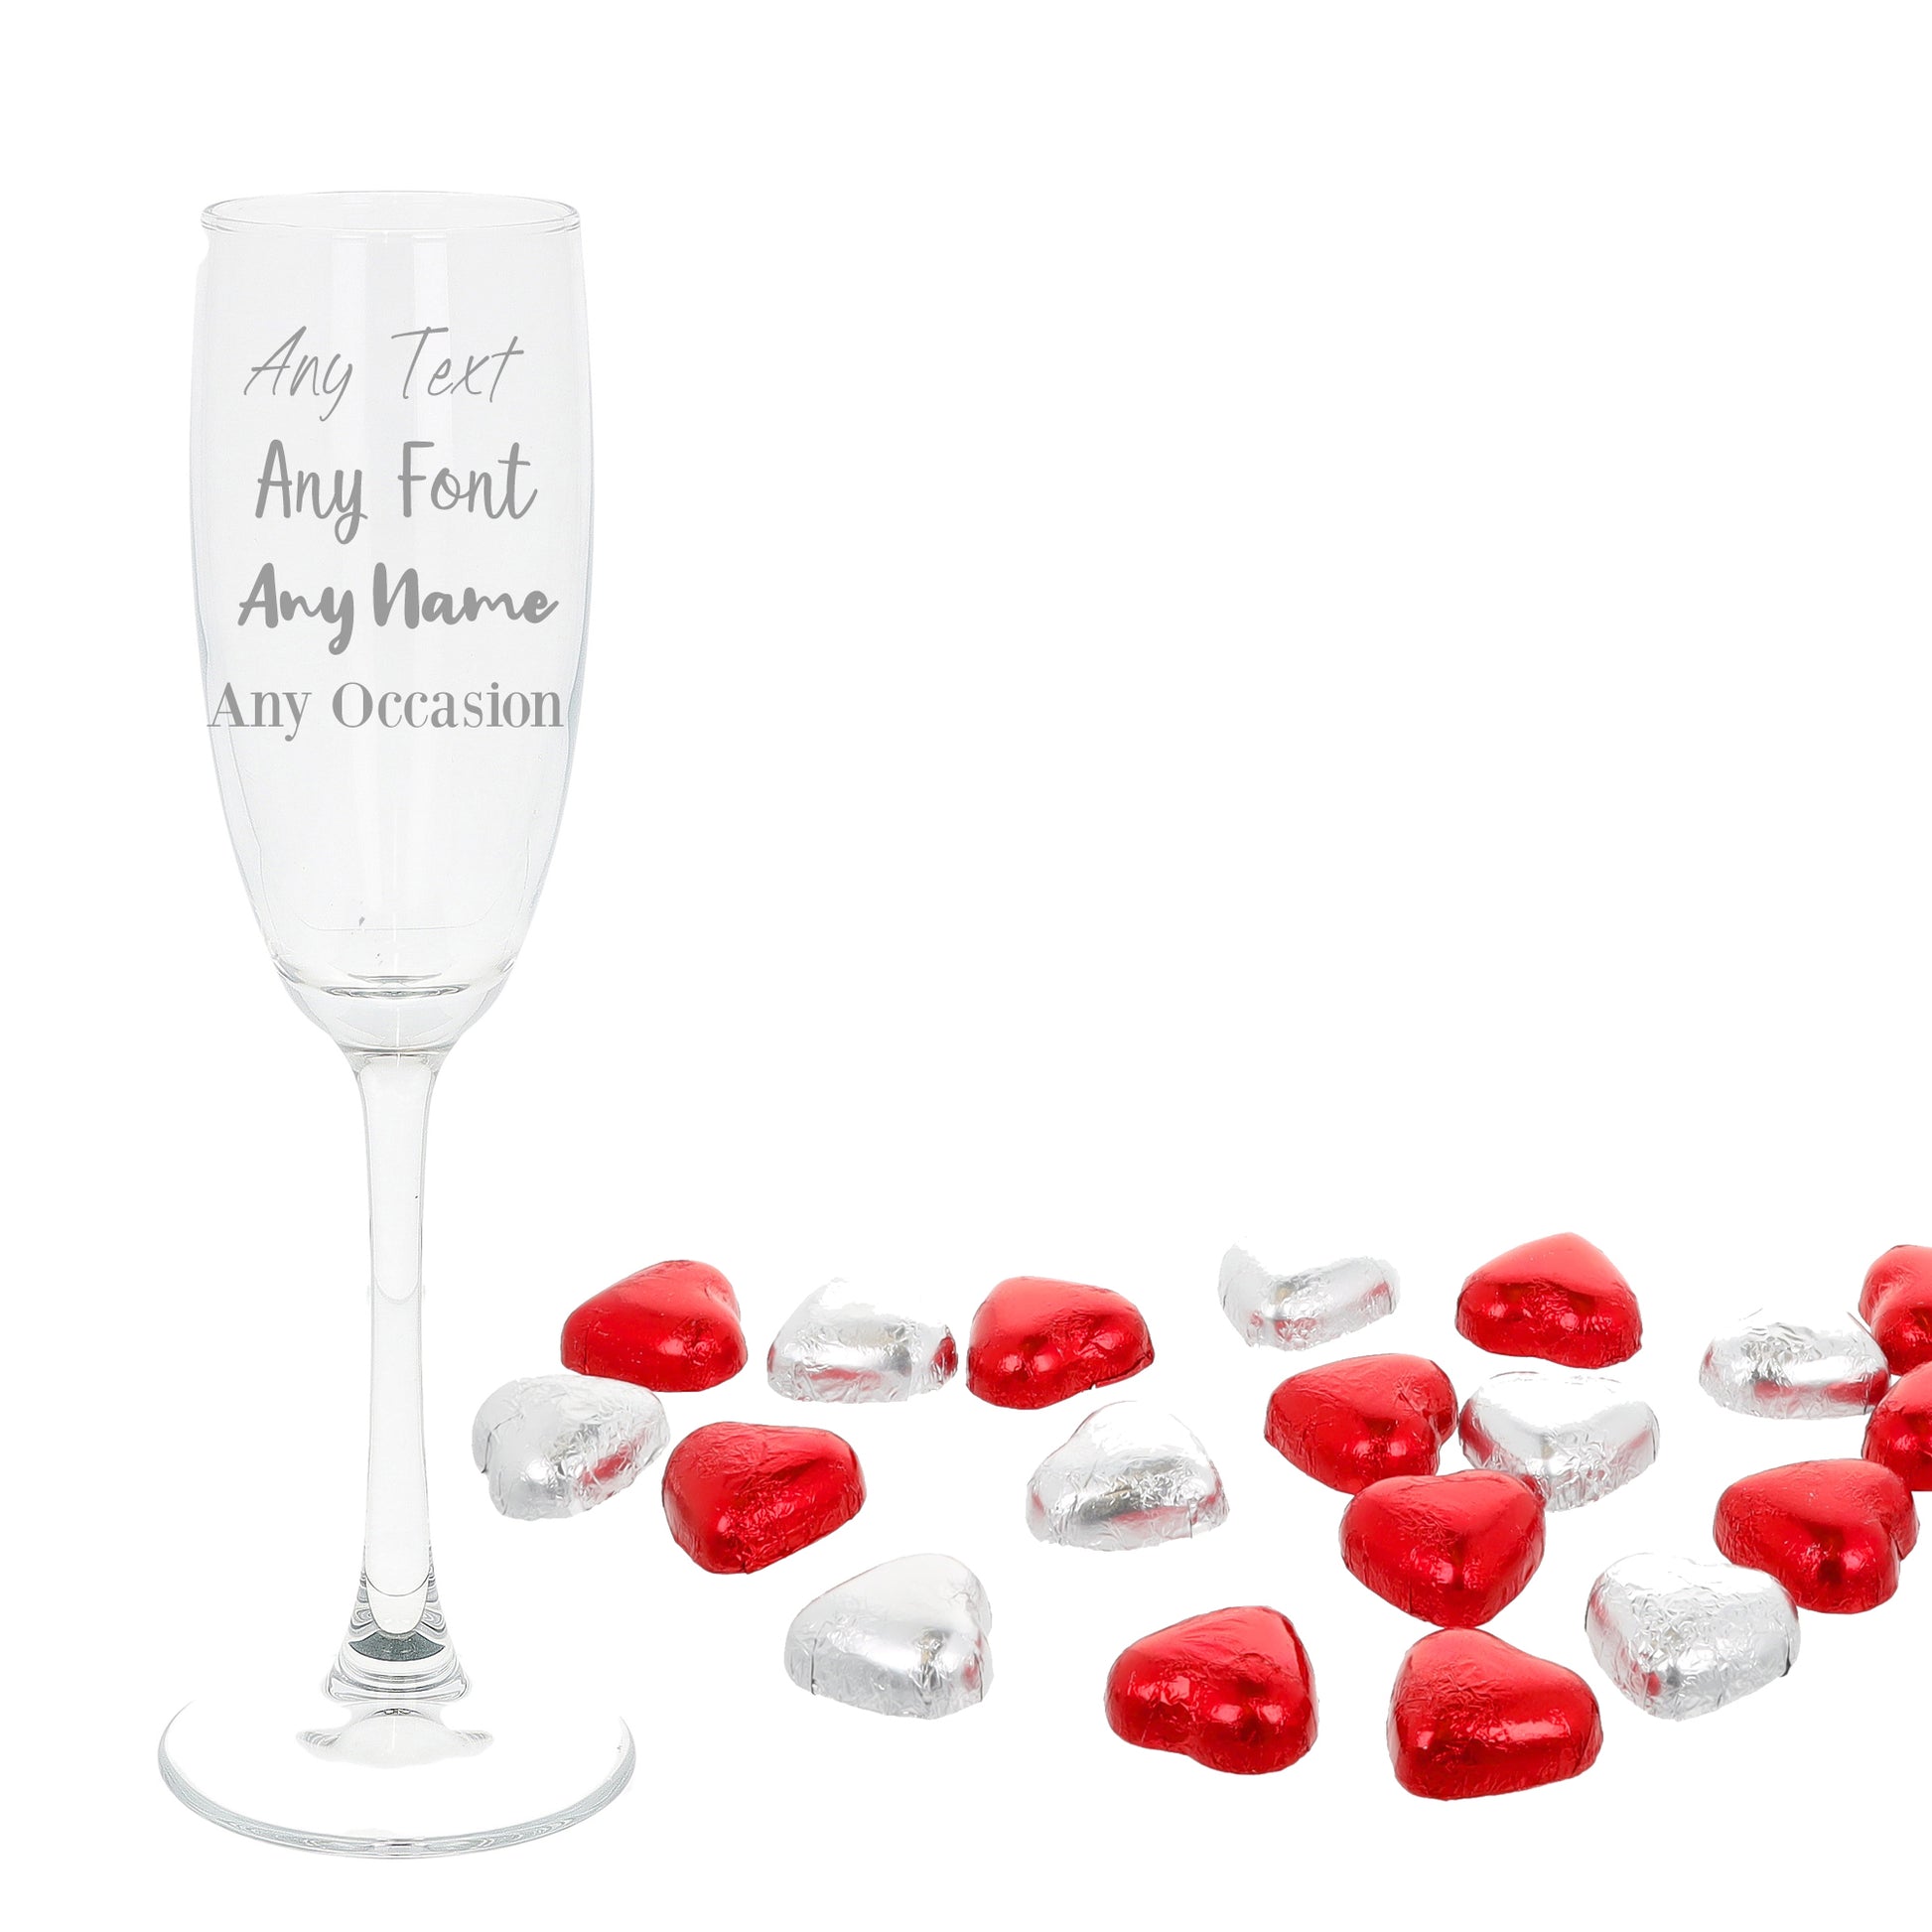 Create Your Own Standard Personalised Engraved Champagne Flute  - Always Looking Good - Chocolate Hearts Filled  